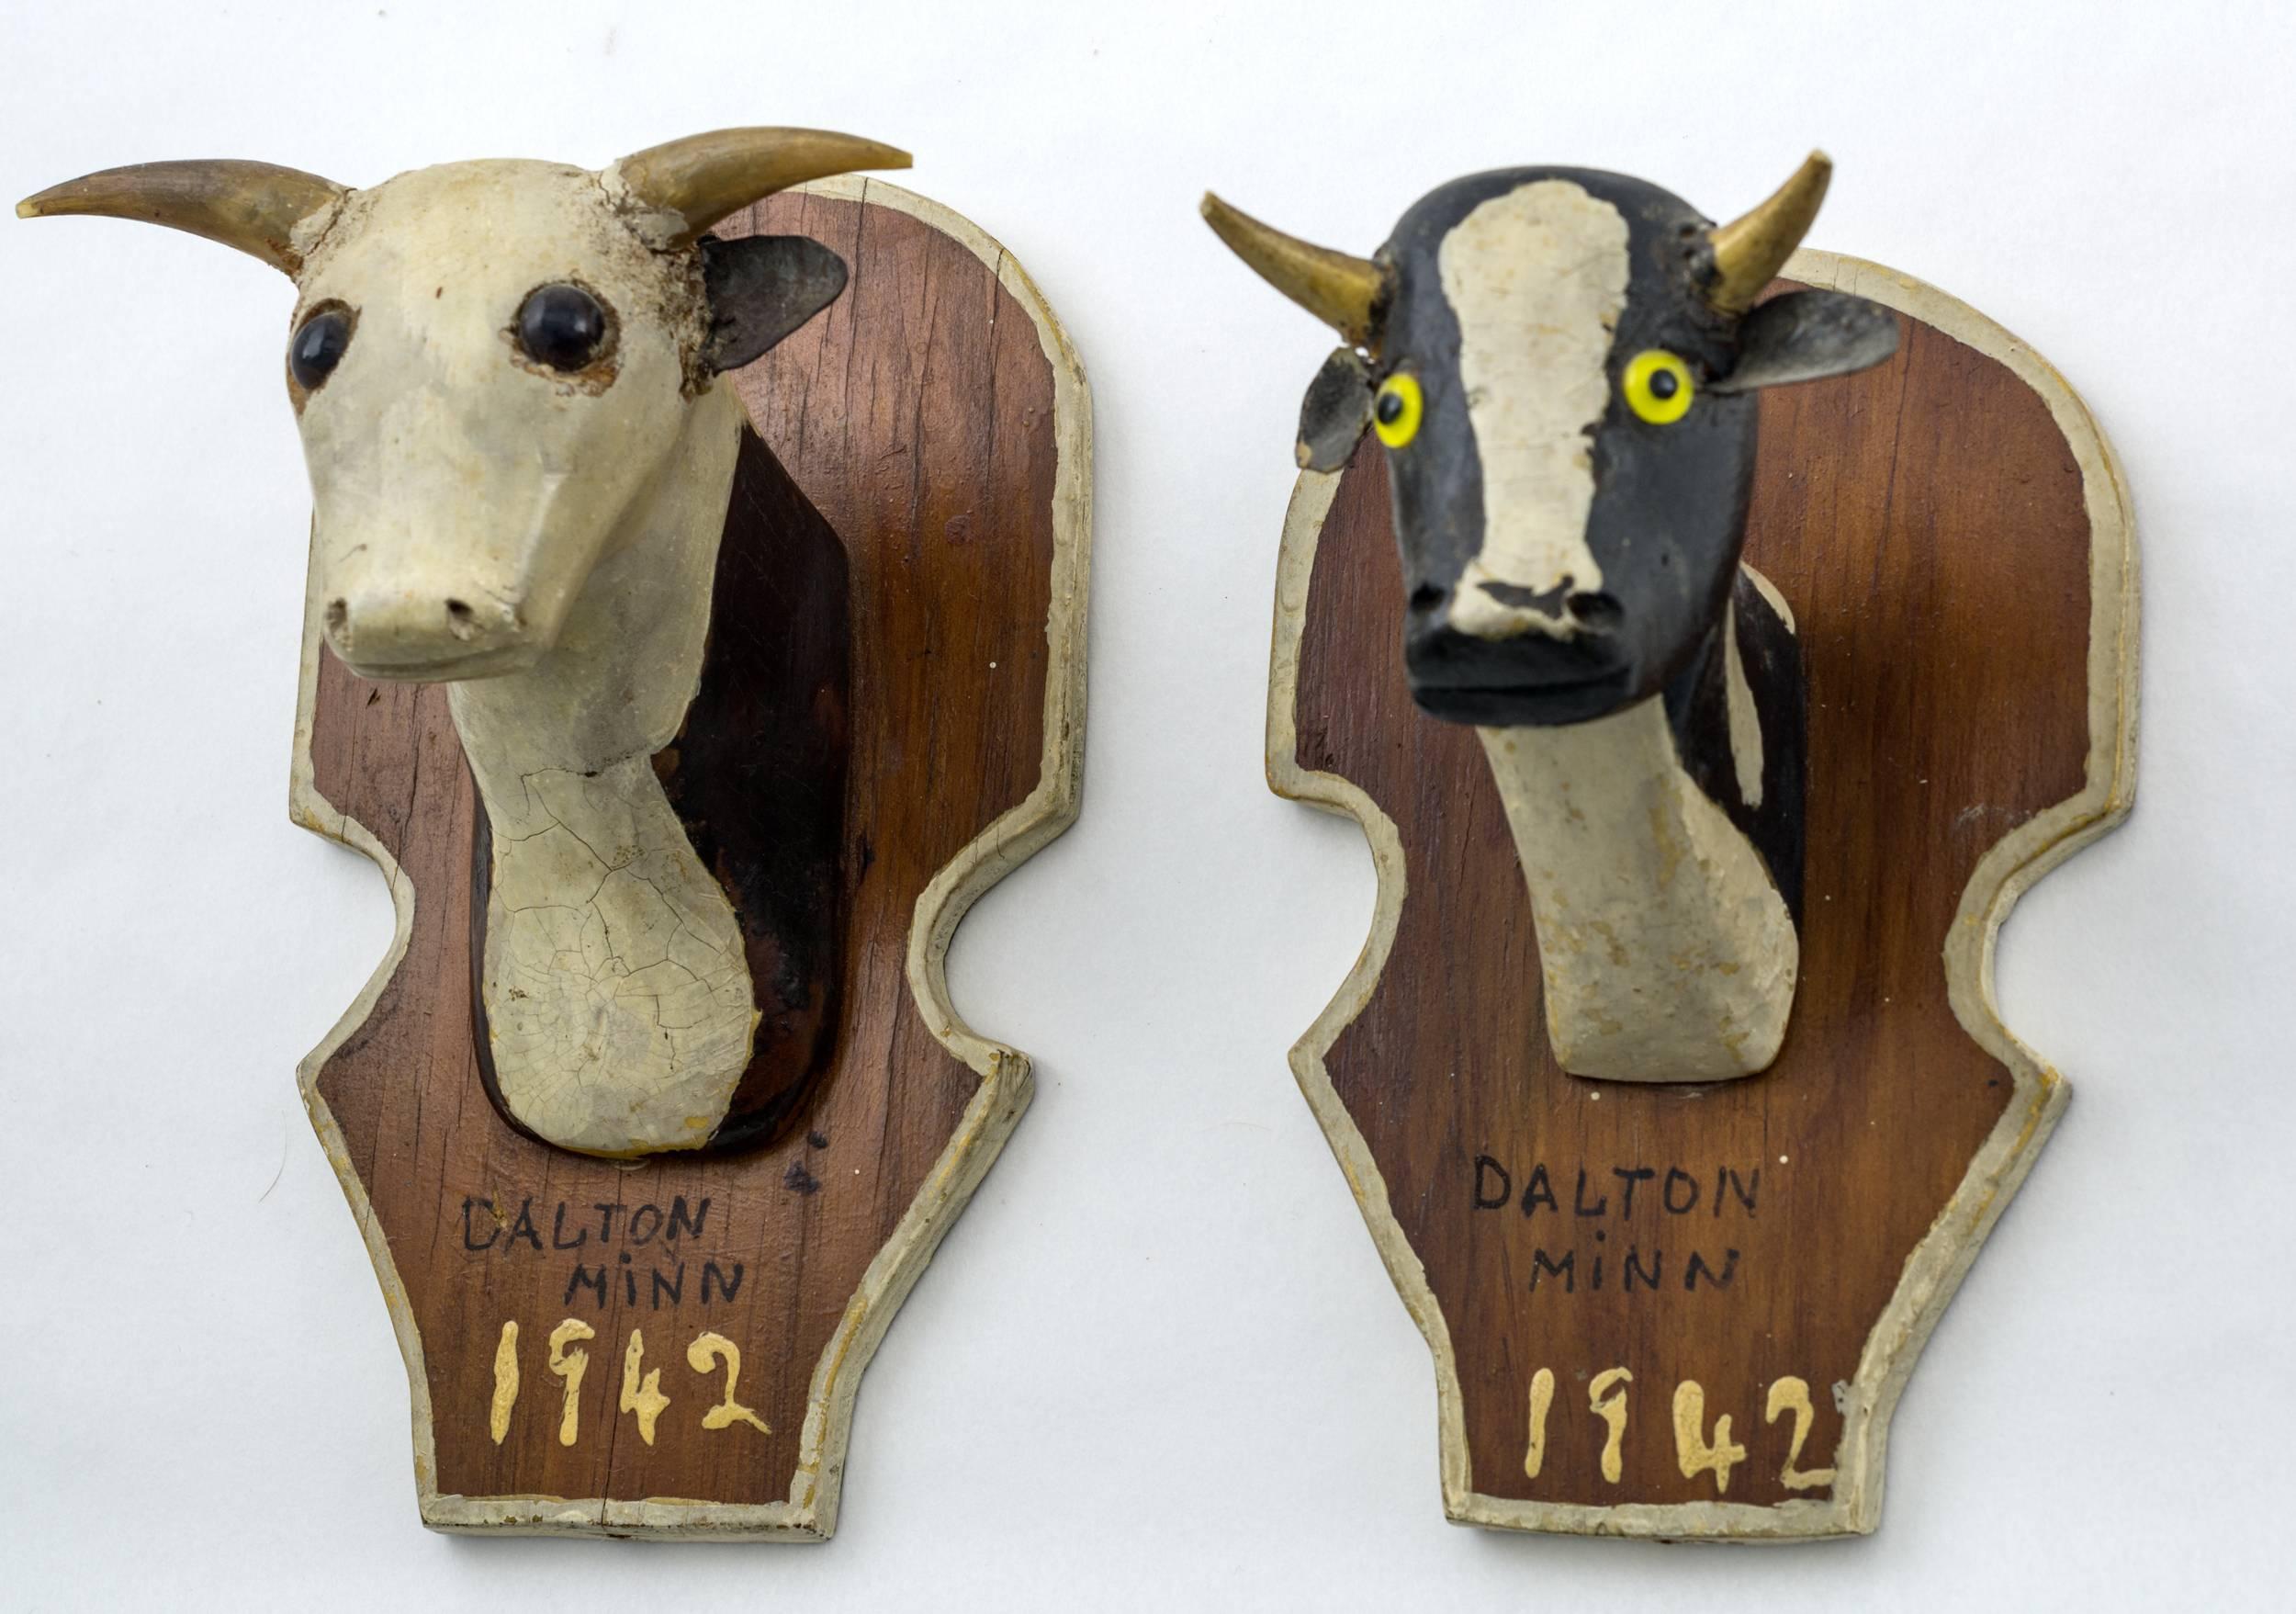 Each cow is carved from Pine with glass eyes and the original paint.
Both signed and dated on the back 